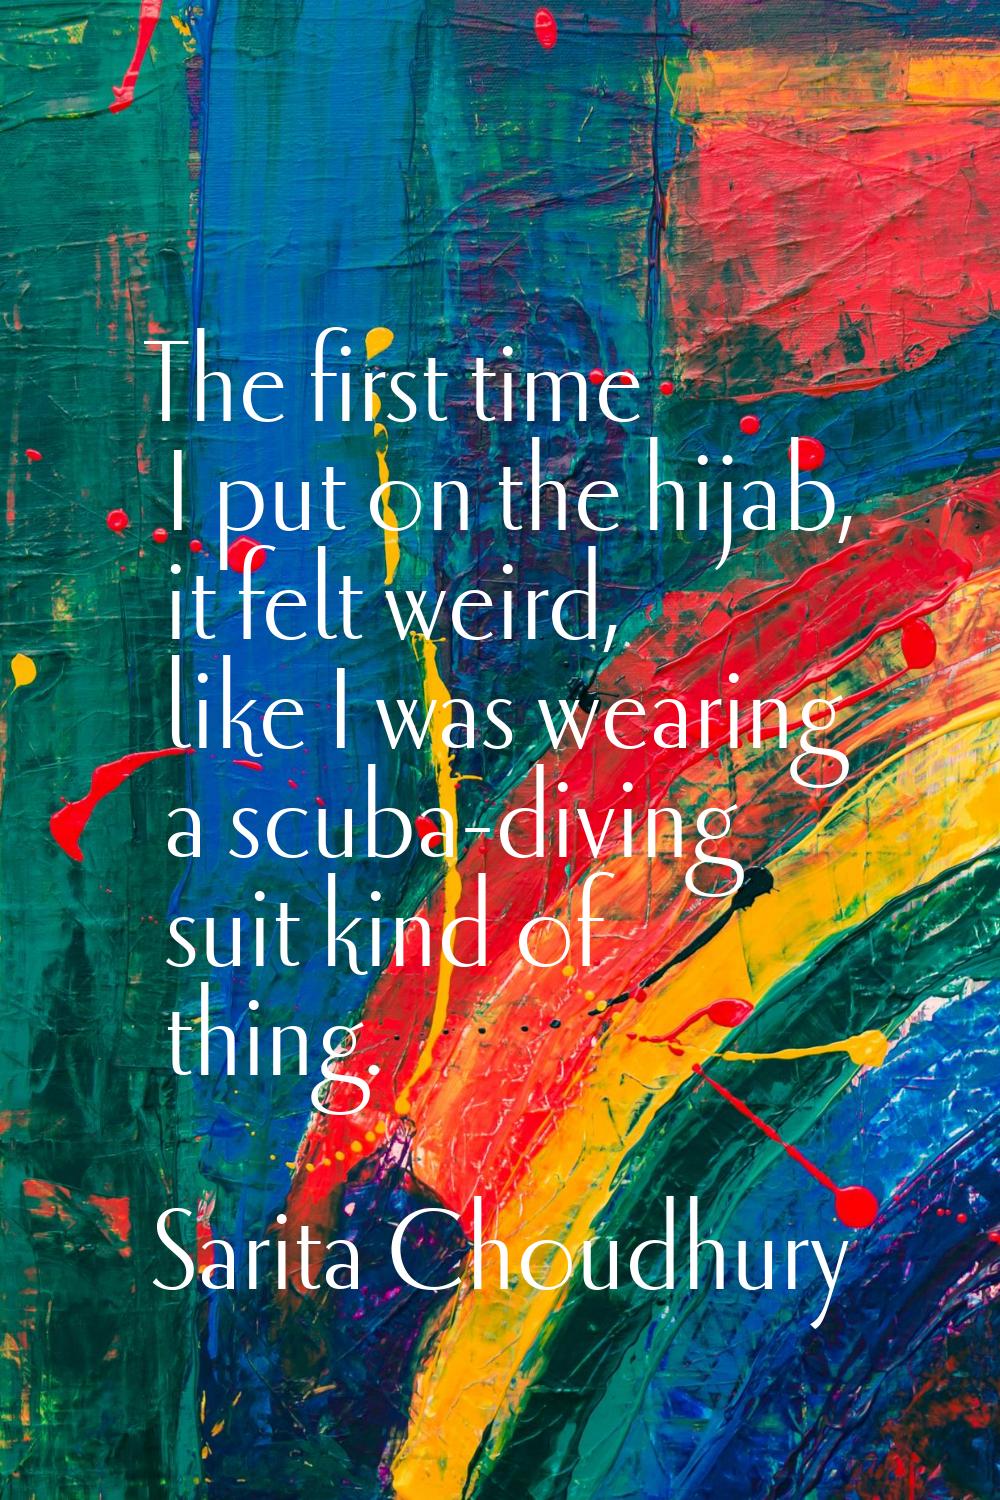 The first time I put on the hijab, it felt weird, like I was wearing a scuba-diving suit kind of th